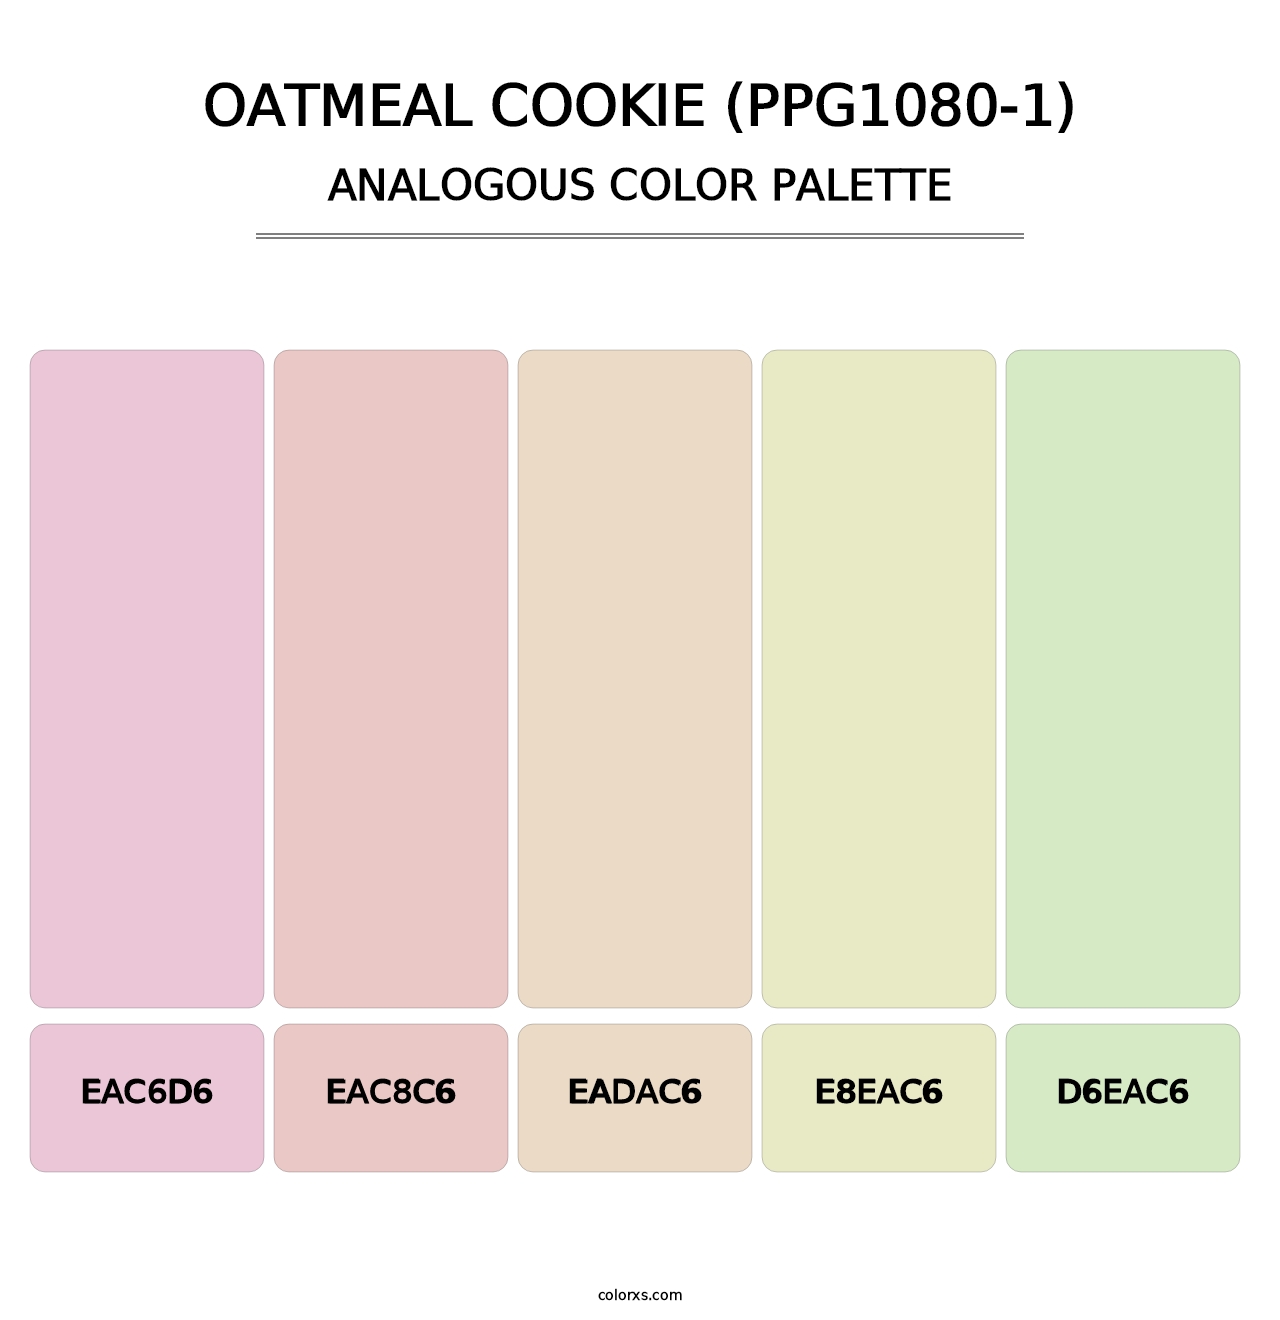 Oatmeal Cookie (PPG1080-1) - Analogous Color Palette